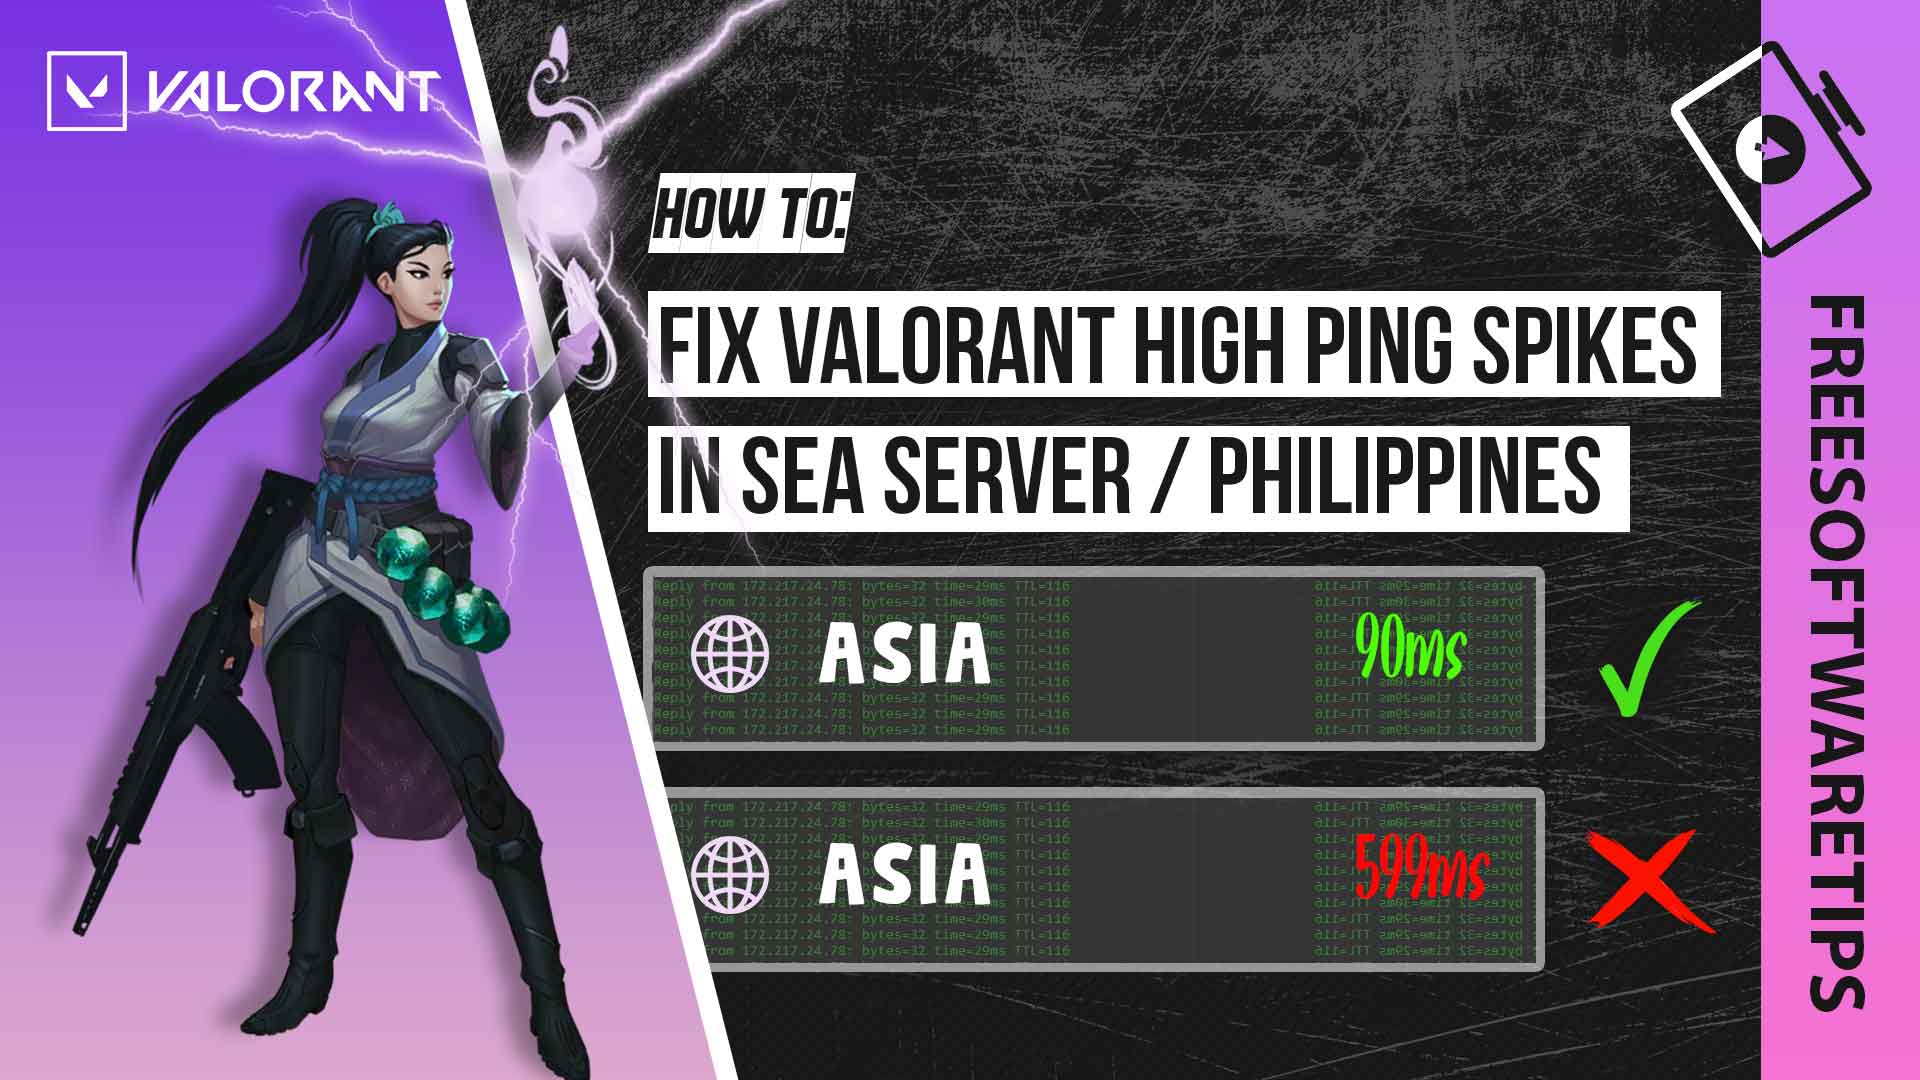 how-to-fix-valorant-high-ping-spikes-in-philippines-sea-server